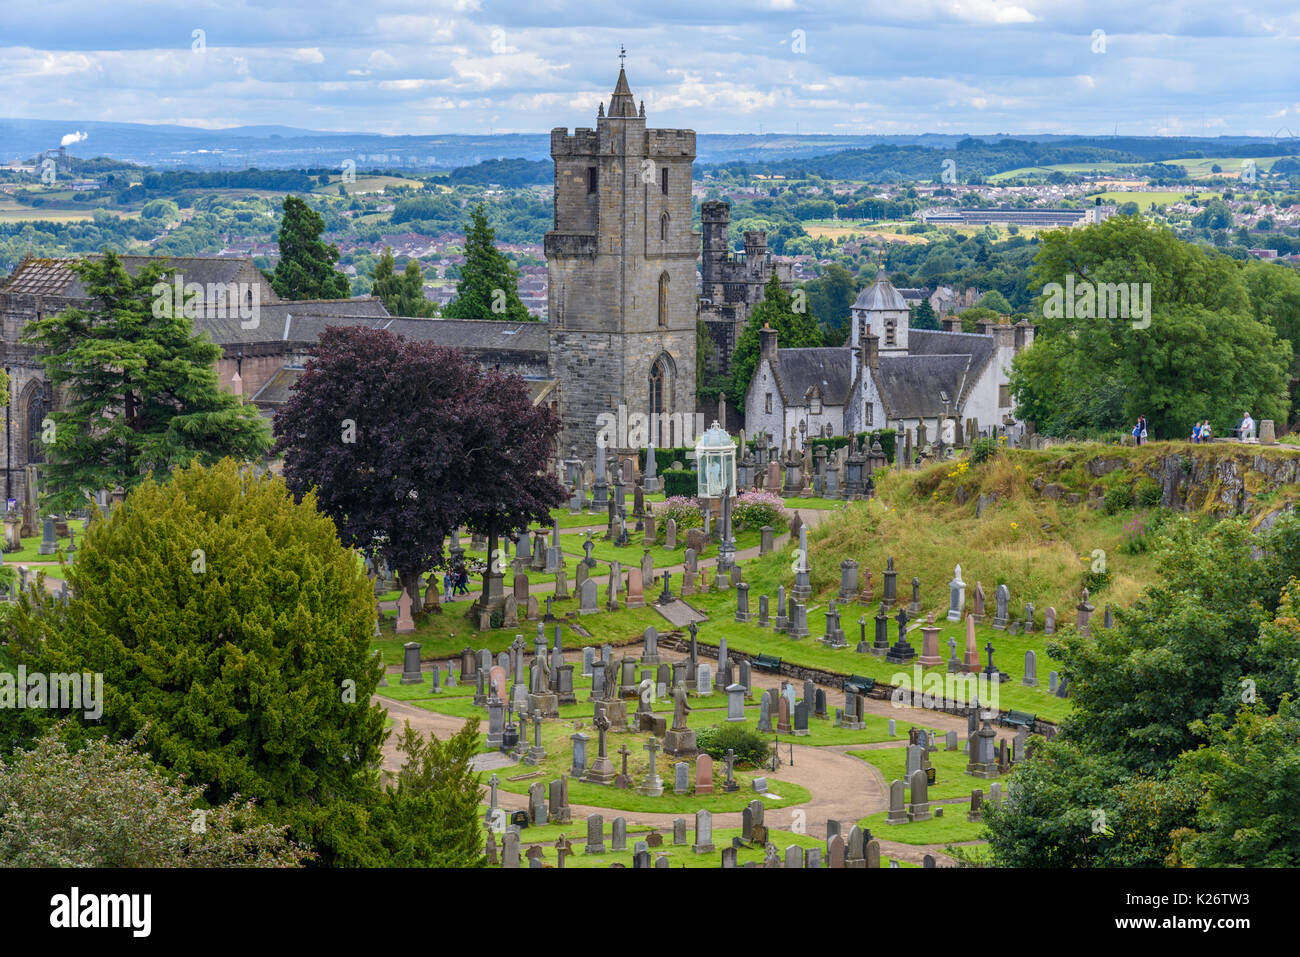 STRILING - UNITED KINGDOM - AUGUST 9, 2017 - View of cemetery near Stirling Castle in Scotland with some tourists visiting it Stock Photo